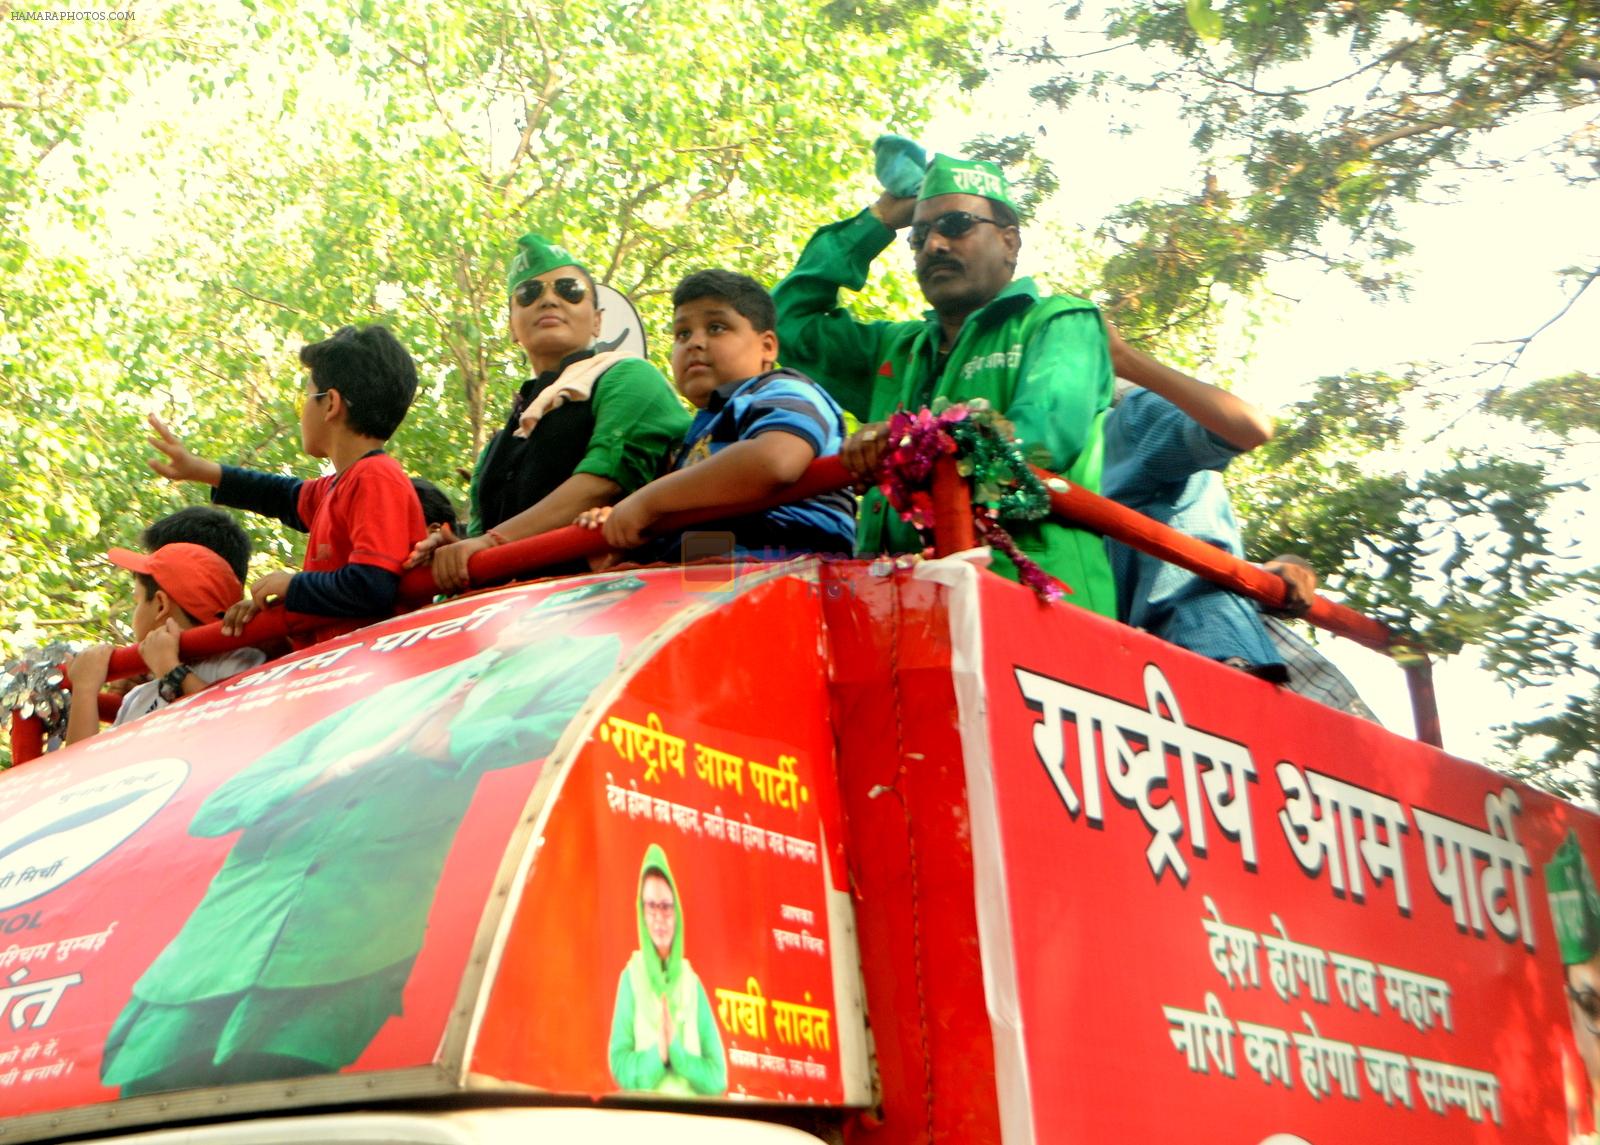 Rakhi Sawant (Candidate of Rashtriya Aam Party from North West Mumbai) during her finale rally